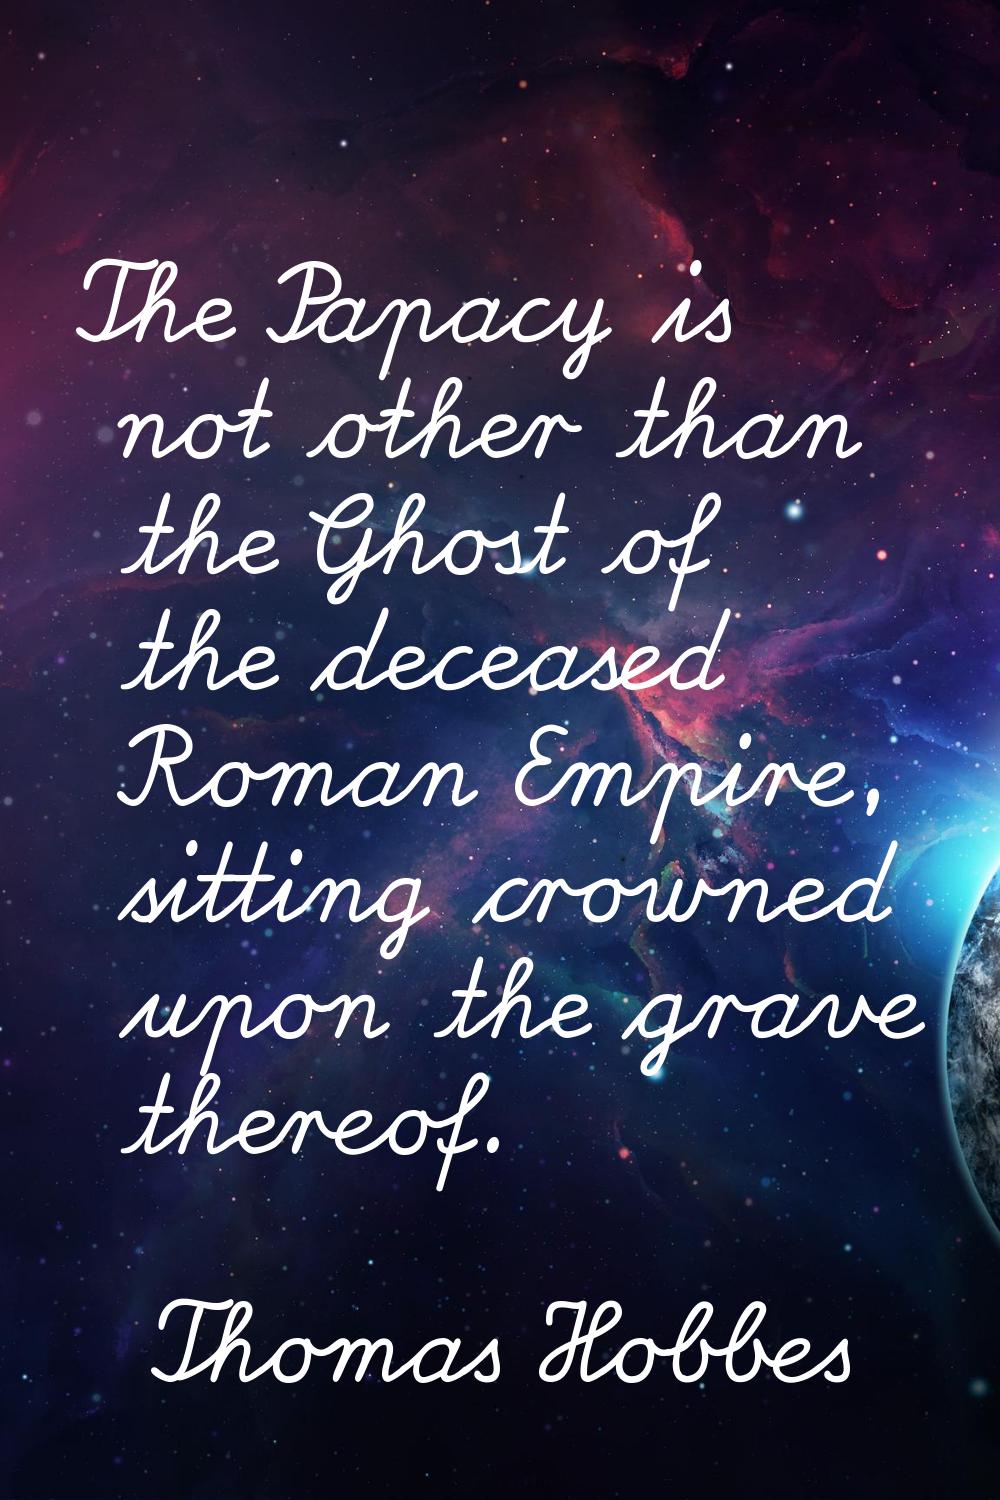 The Papacy is not other than the Ghost of the deceased Roman Empire, sitting crowned upon the grave